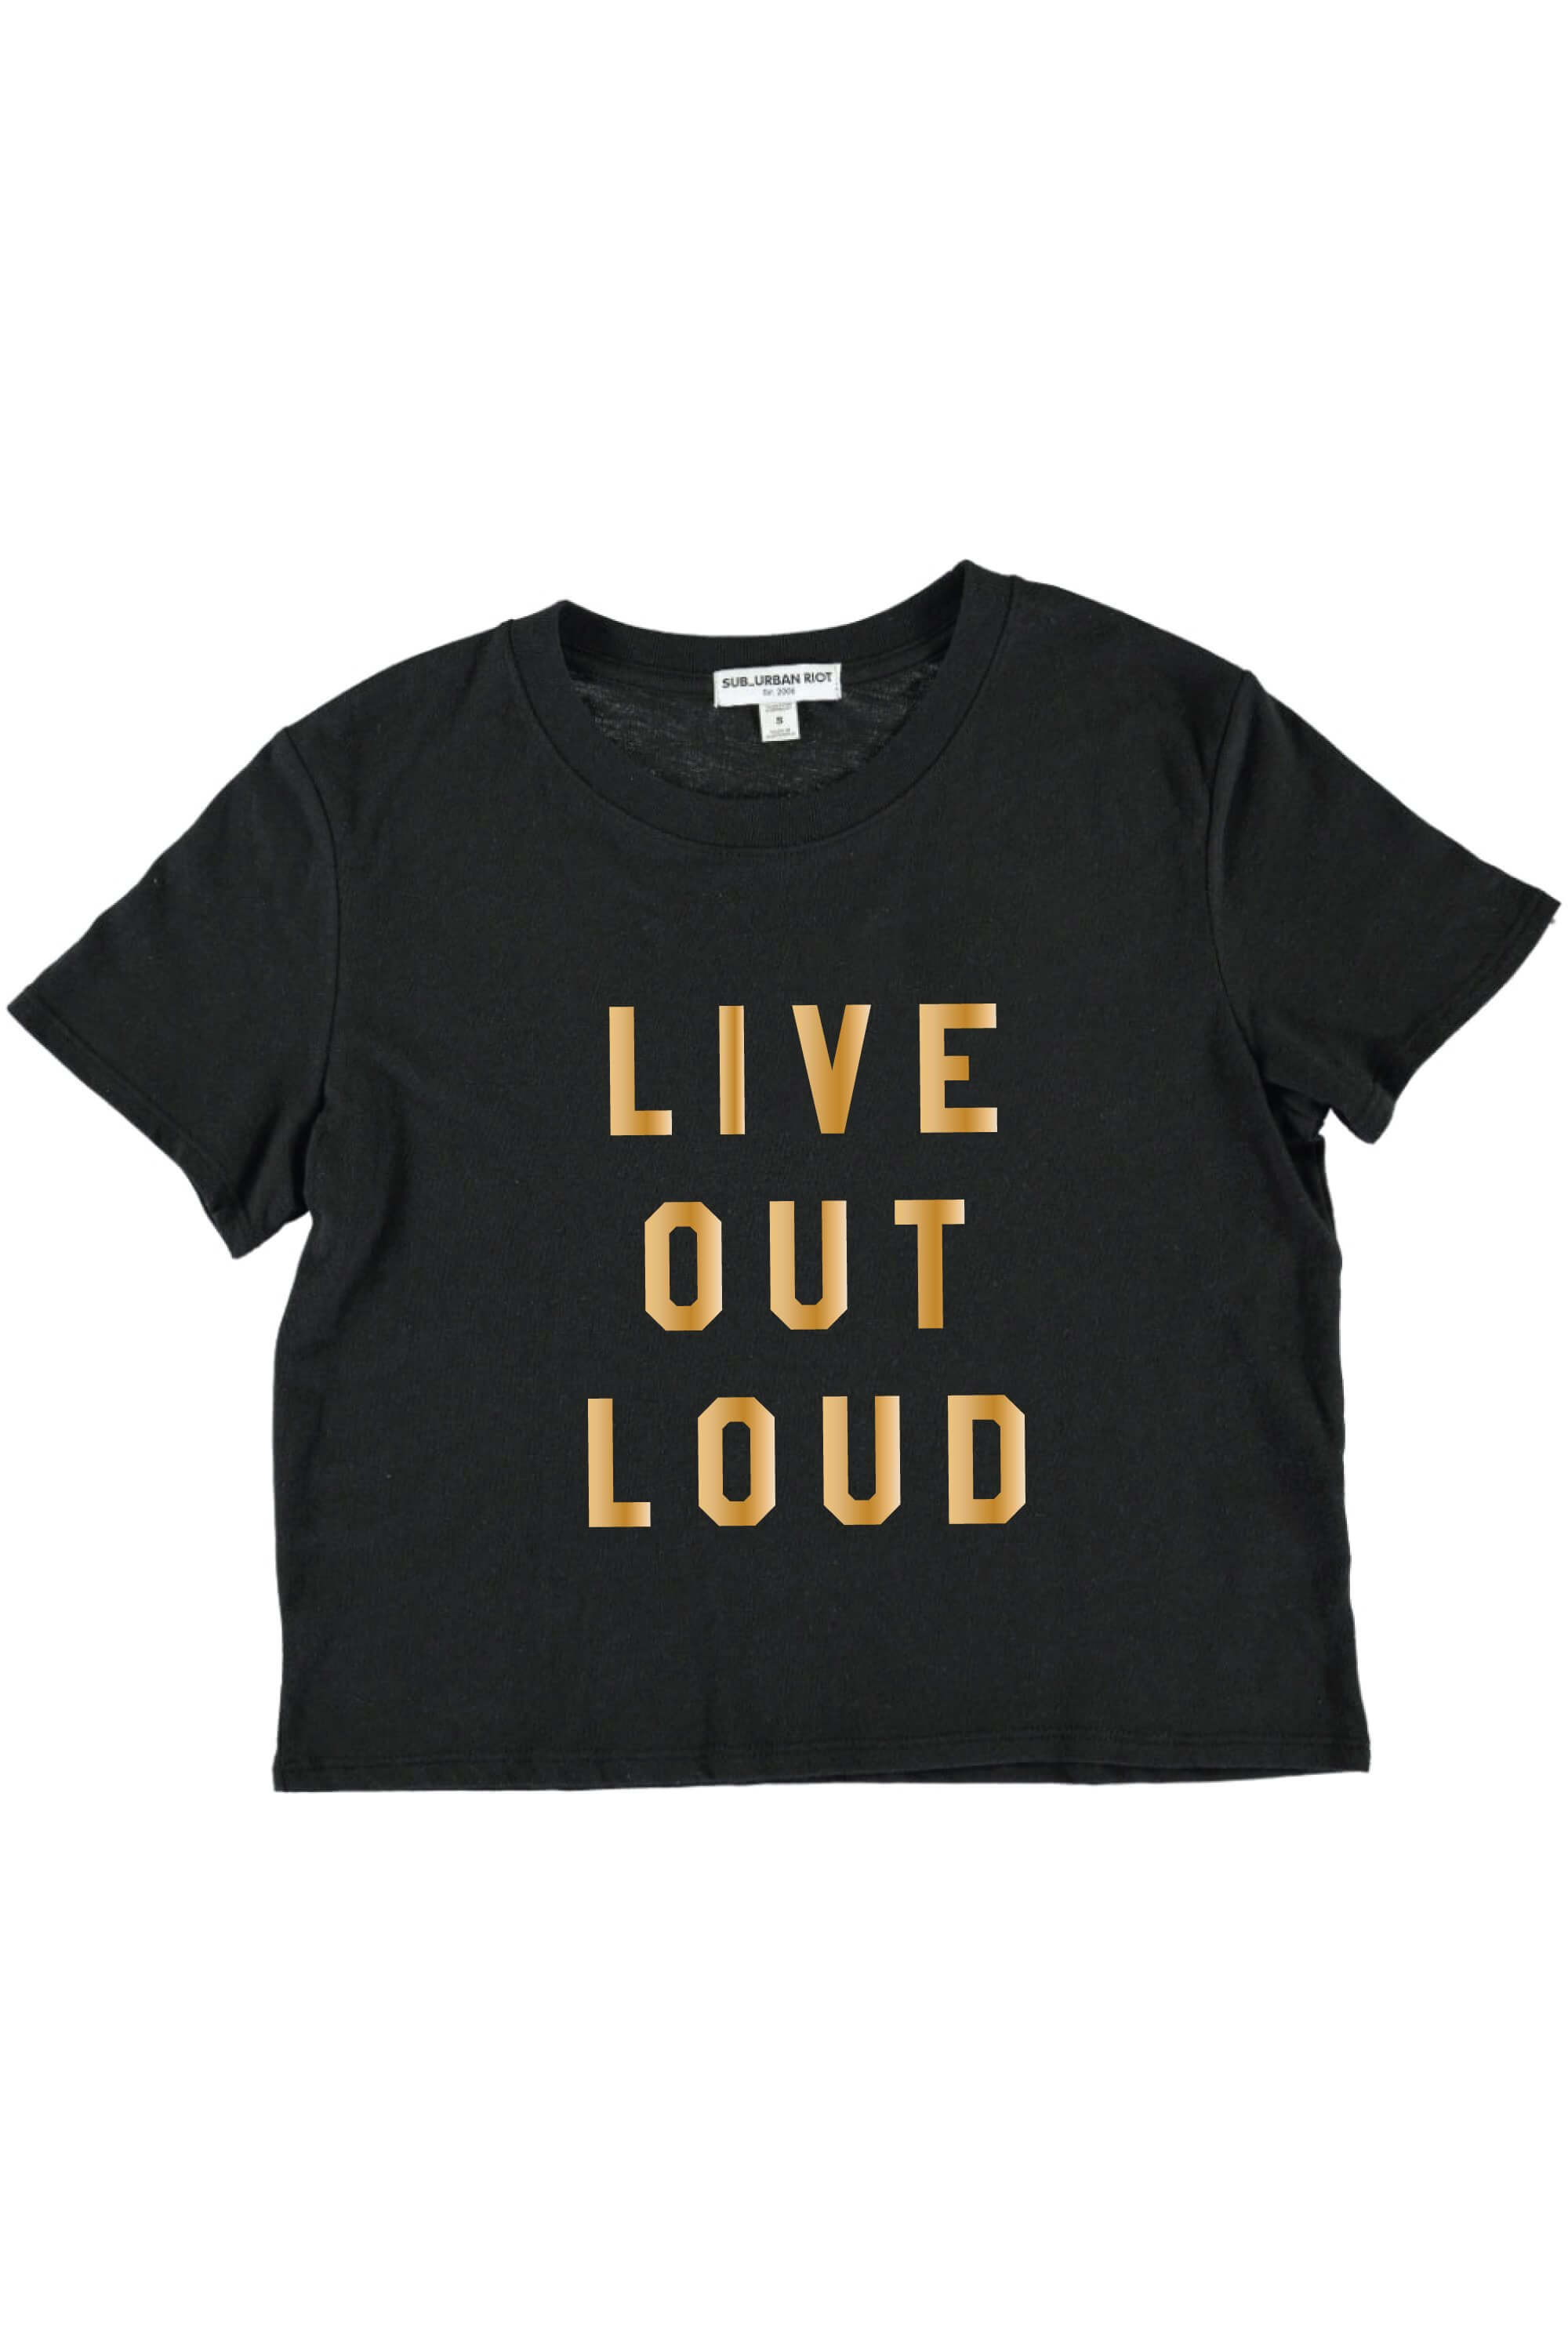 LIVE OUT LOUD YOUTH SIZE CROP TEE